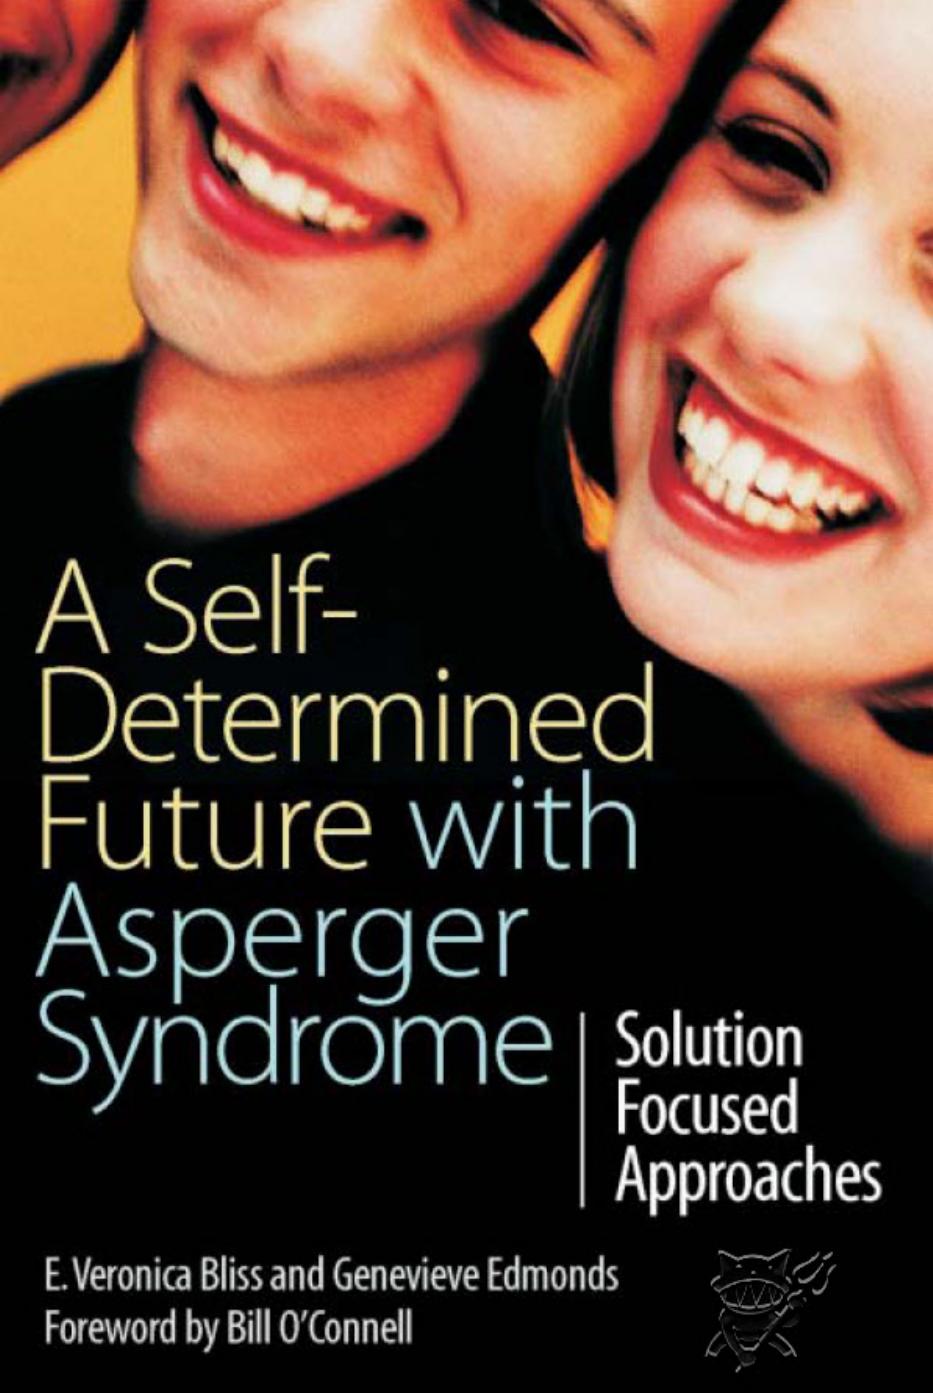 The Complete Guide to Asperger's Syndrome by Tony Attwood